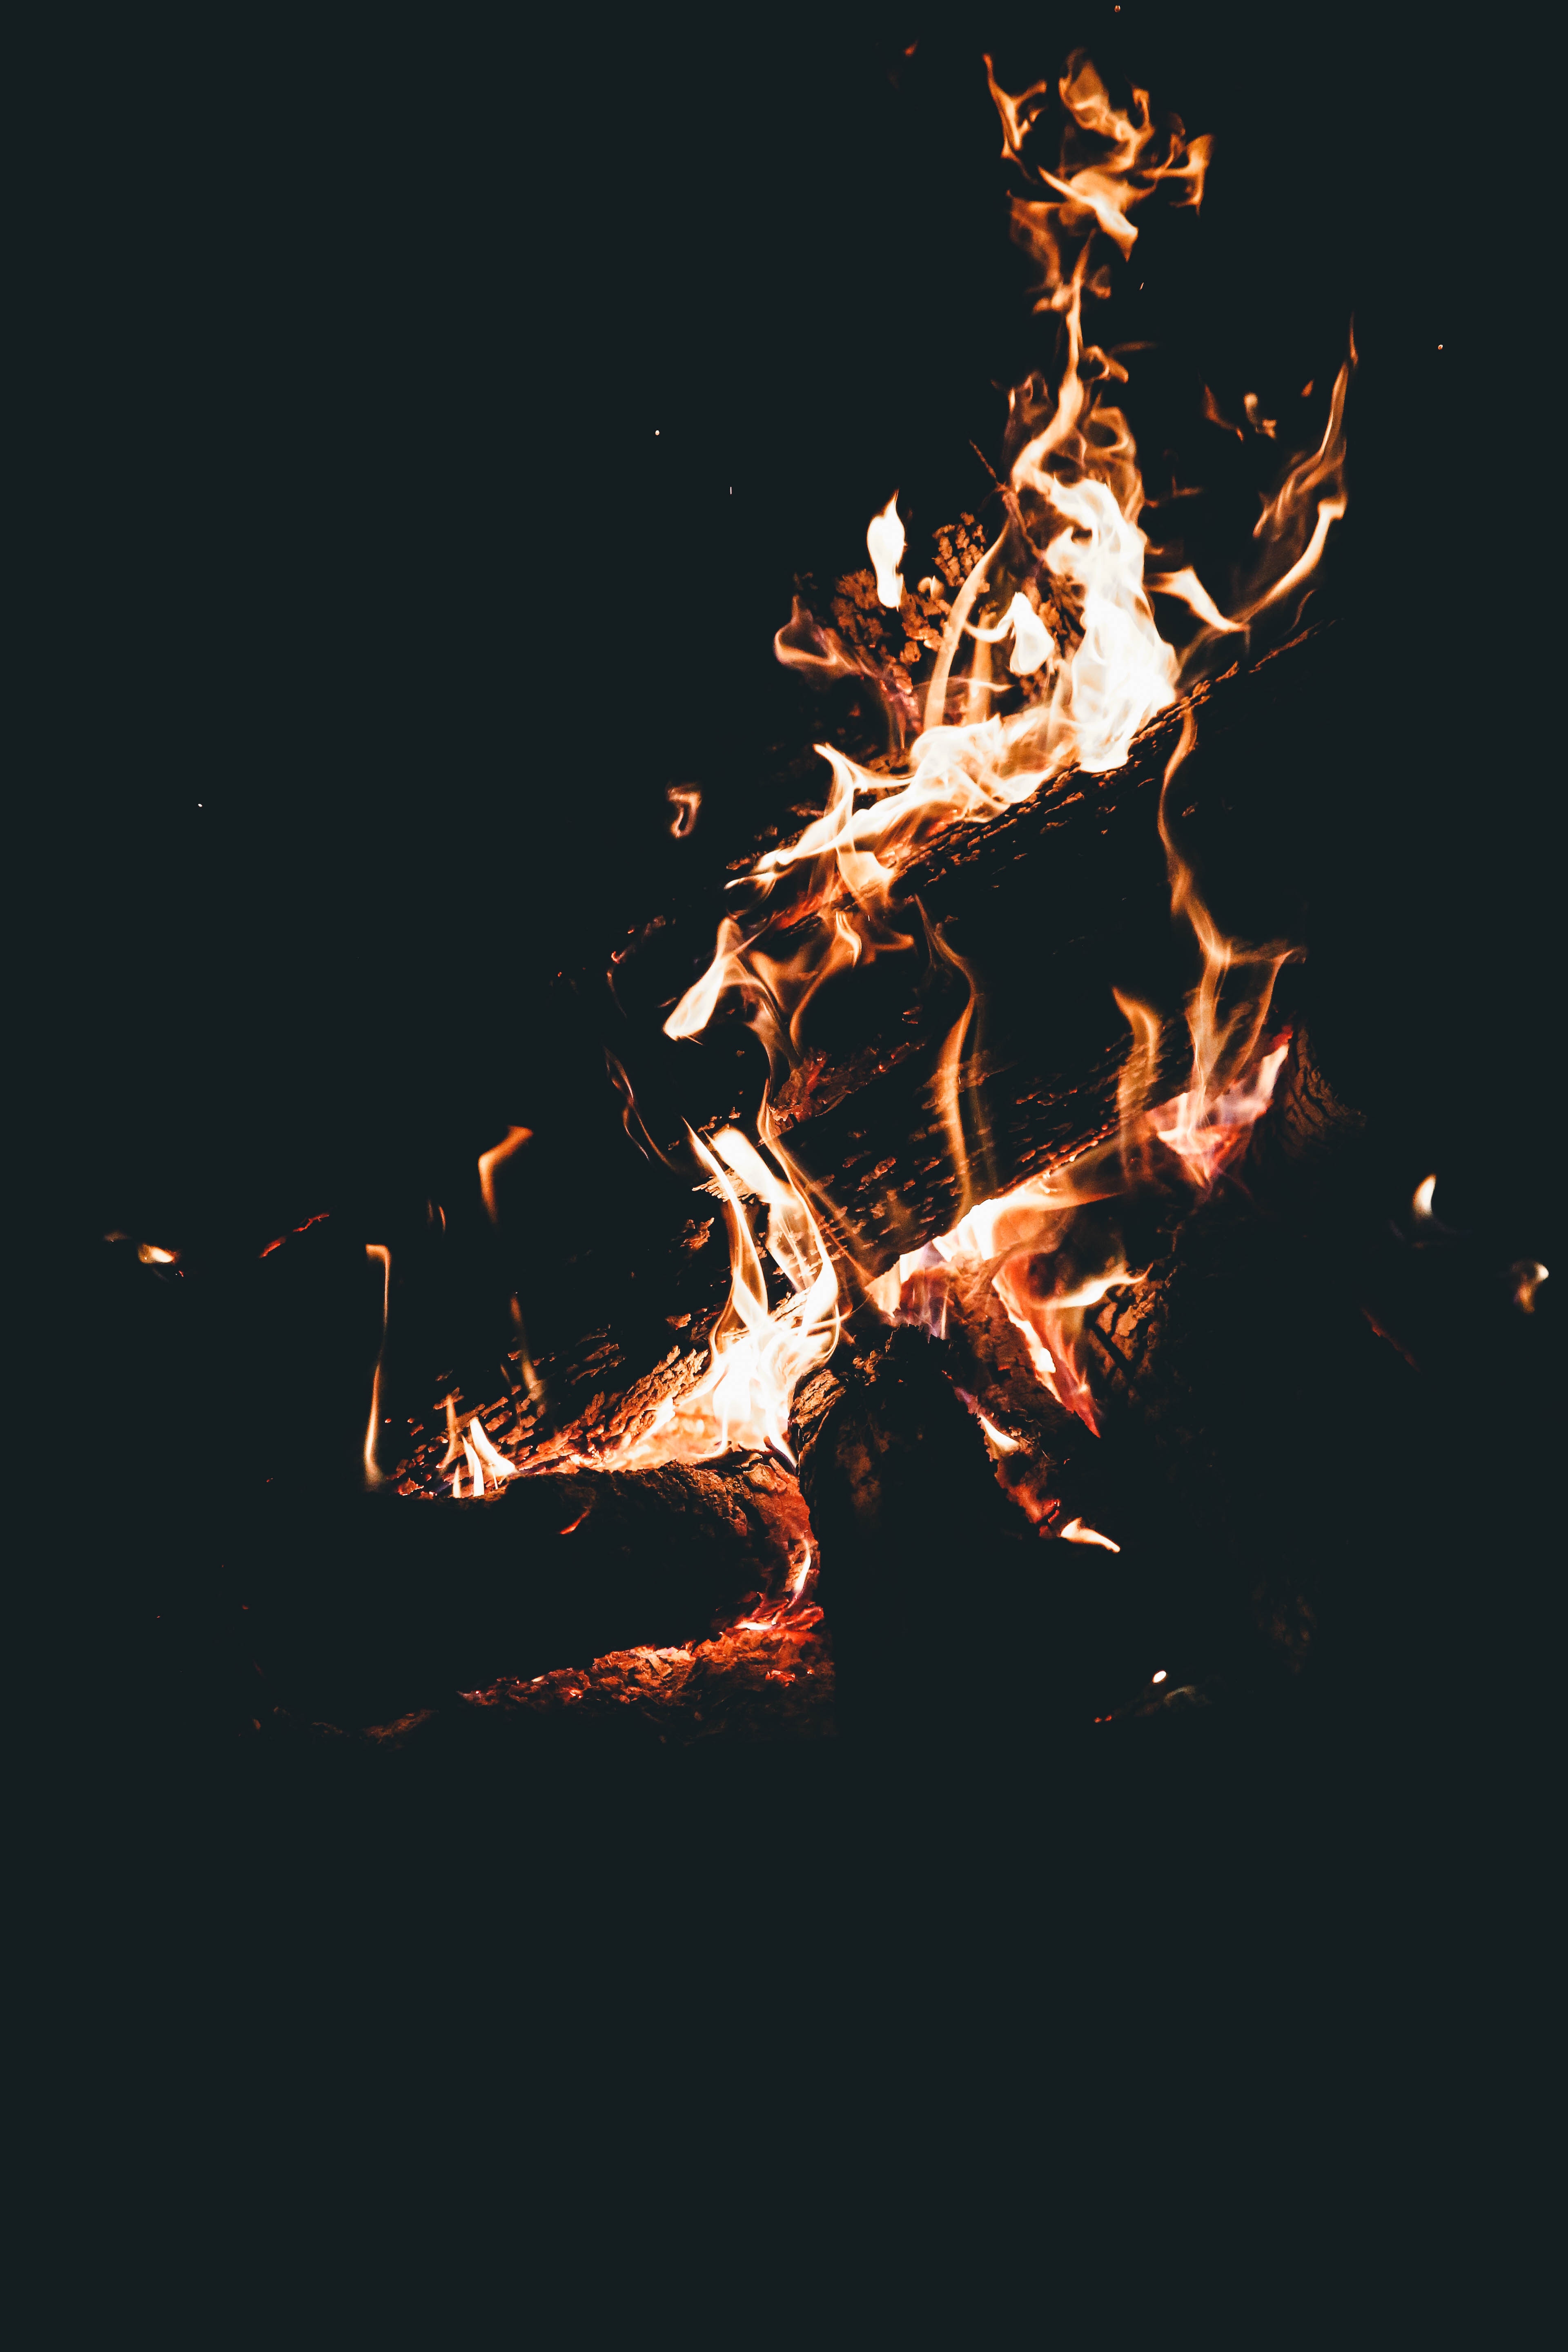 flame, bonfire, dark, fire, firewood, camping, campsite, combustion iphone wallpaper